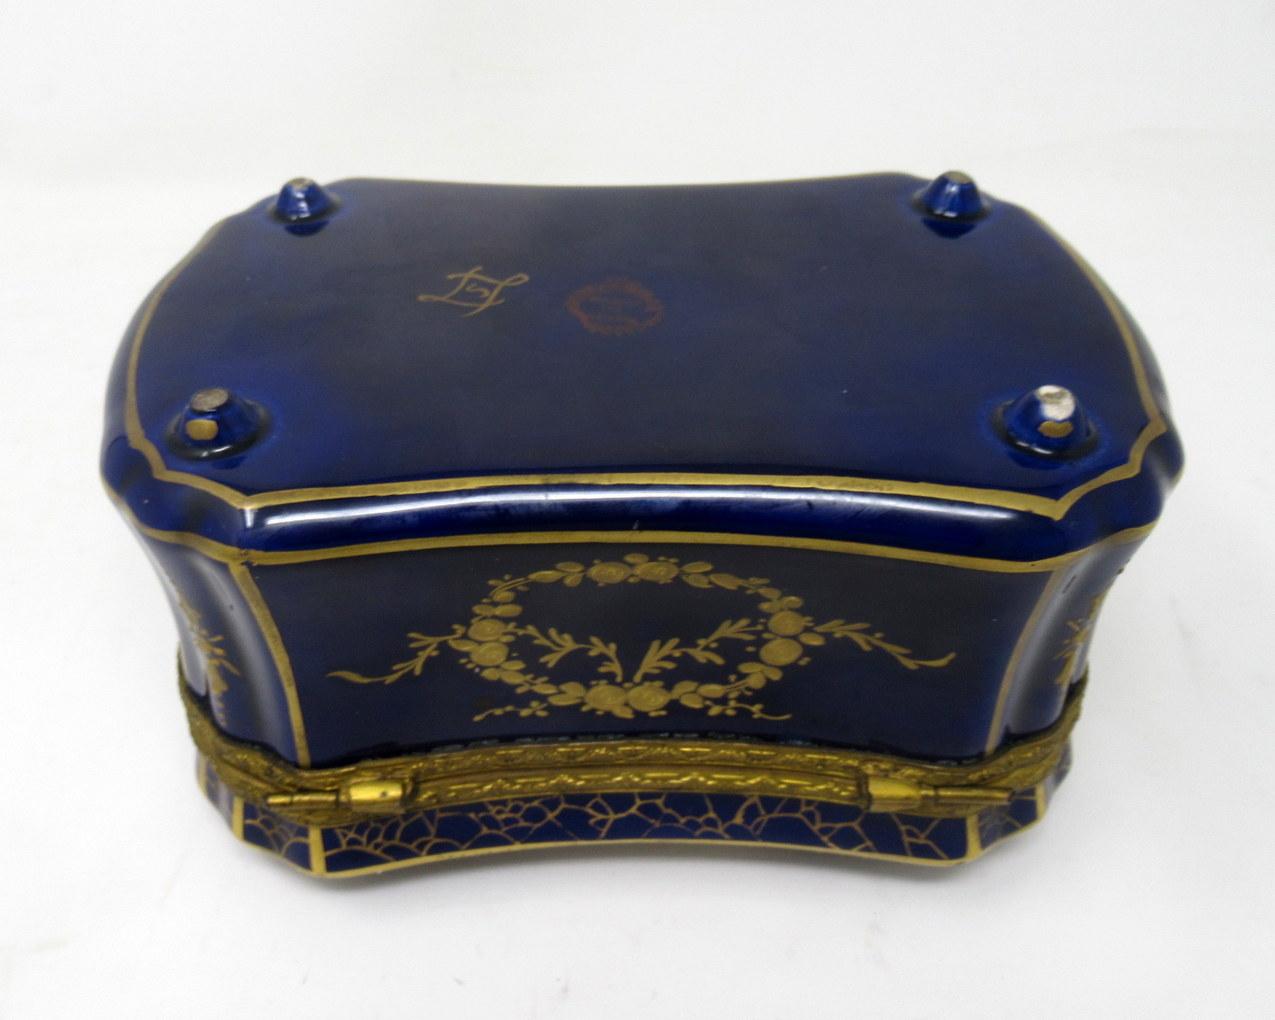 French Sevres Porcelain Hand Painted Jewelry Casket Ormolu Mounts Signed Gilbert 1